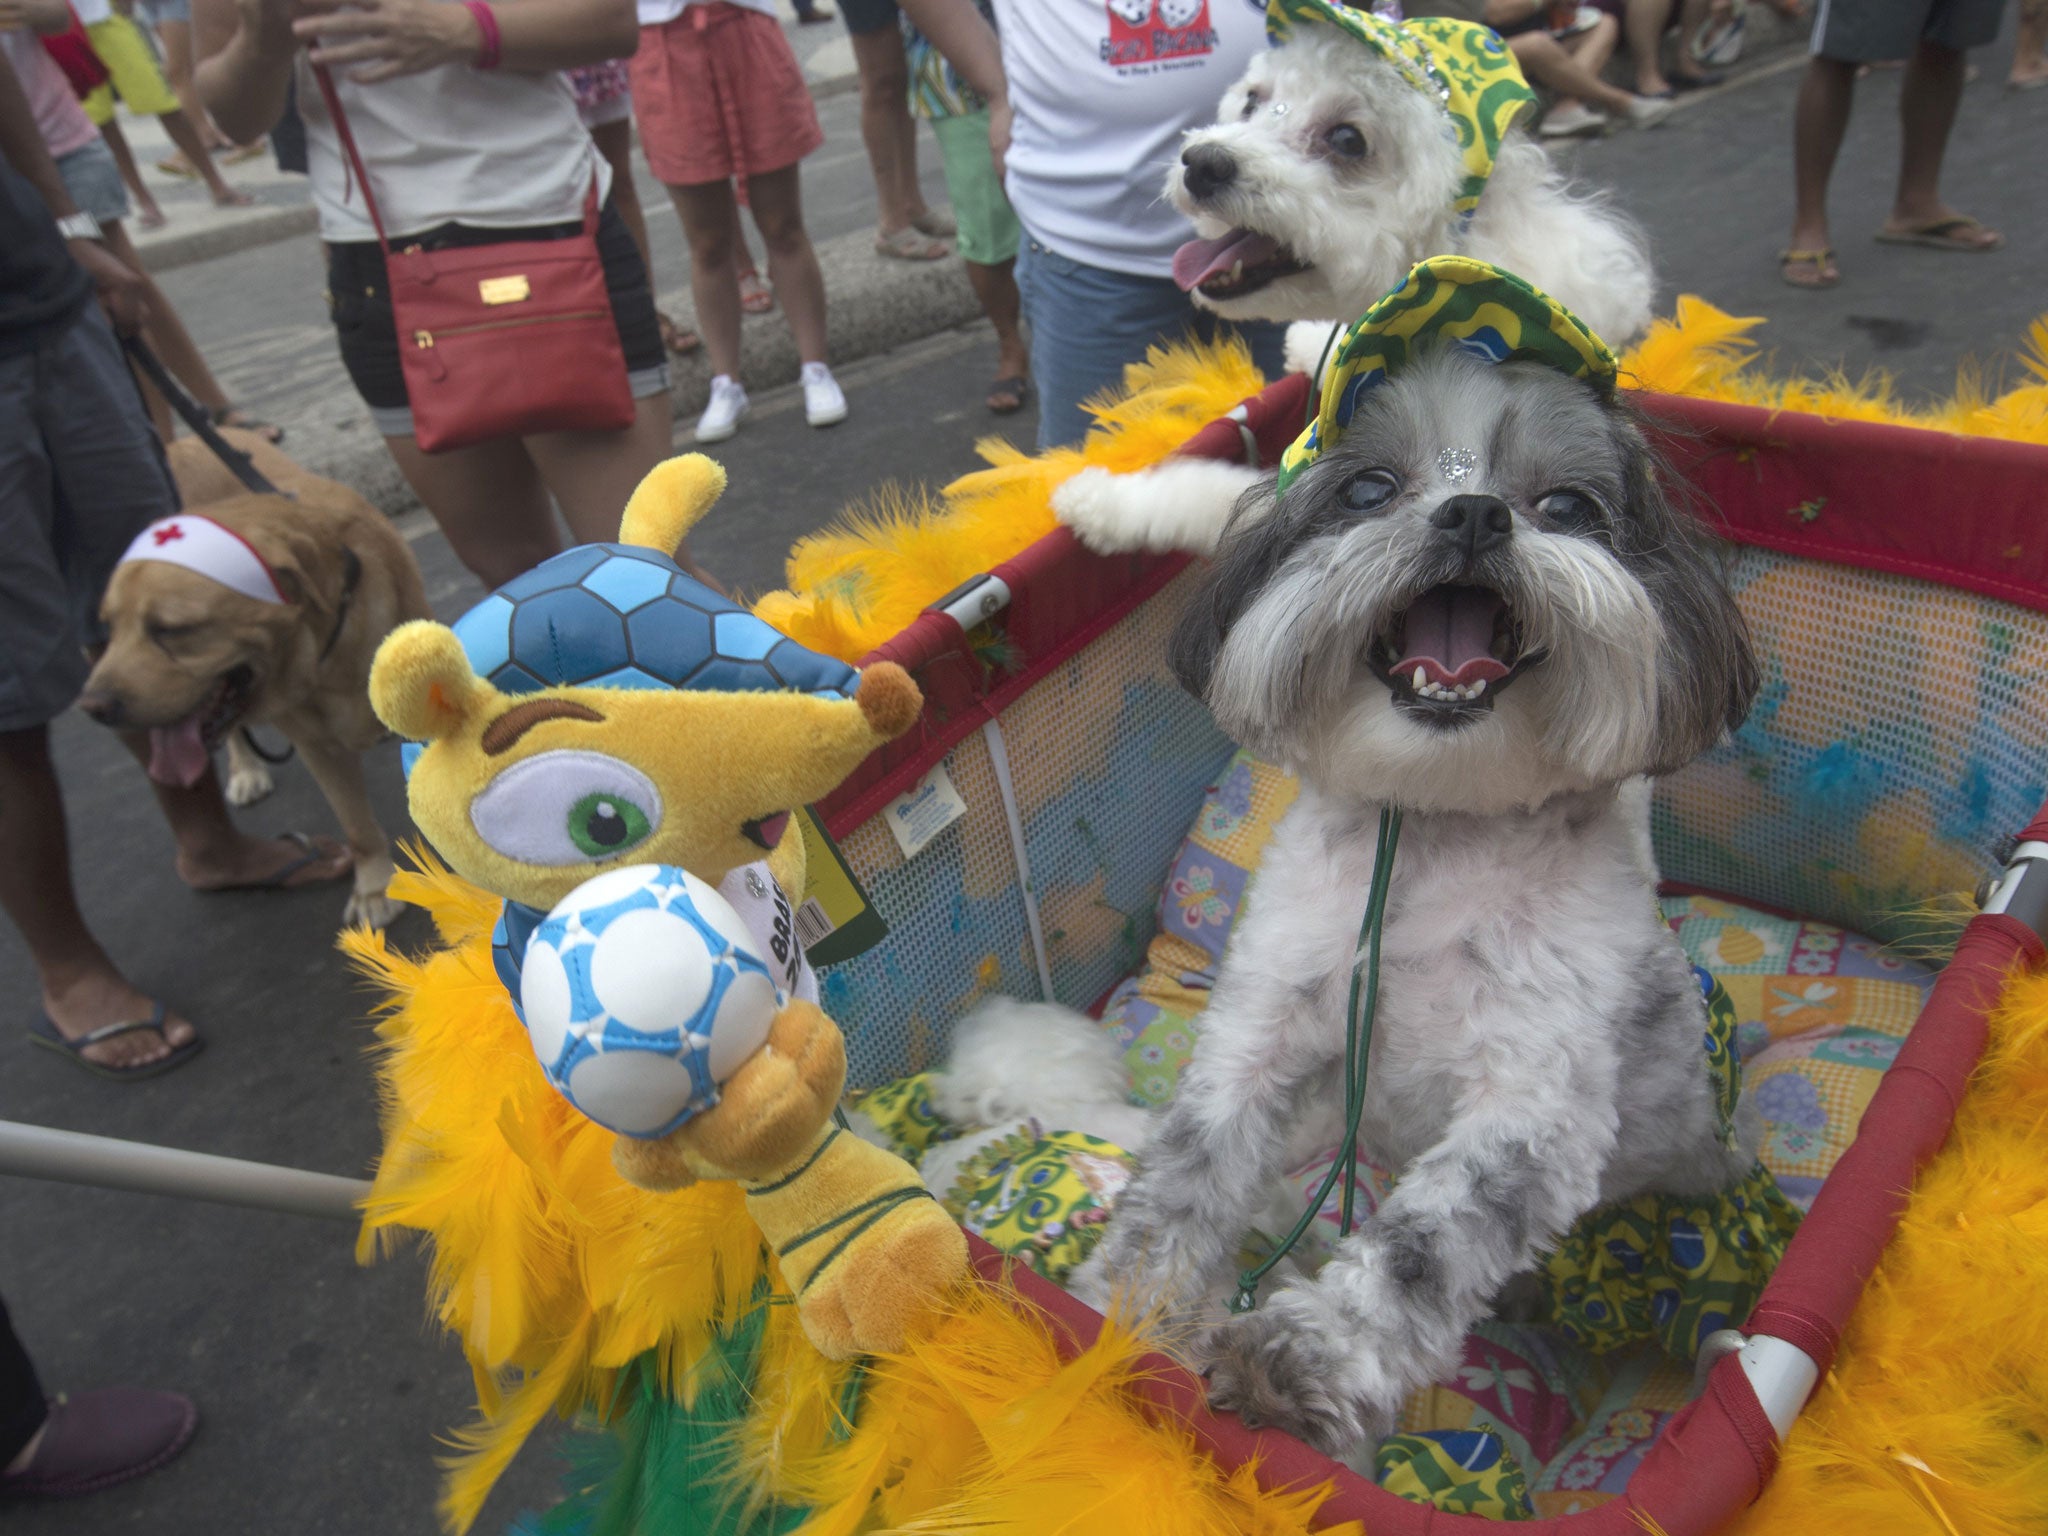 Dogs stand next to 'Fuleco', the official mascot of the 2014 FIFA World Cup, during the "Blocao" dog carnival in Rio de Janeiro